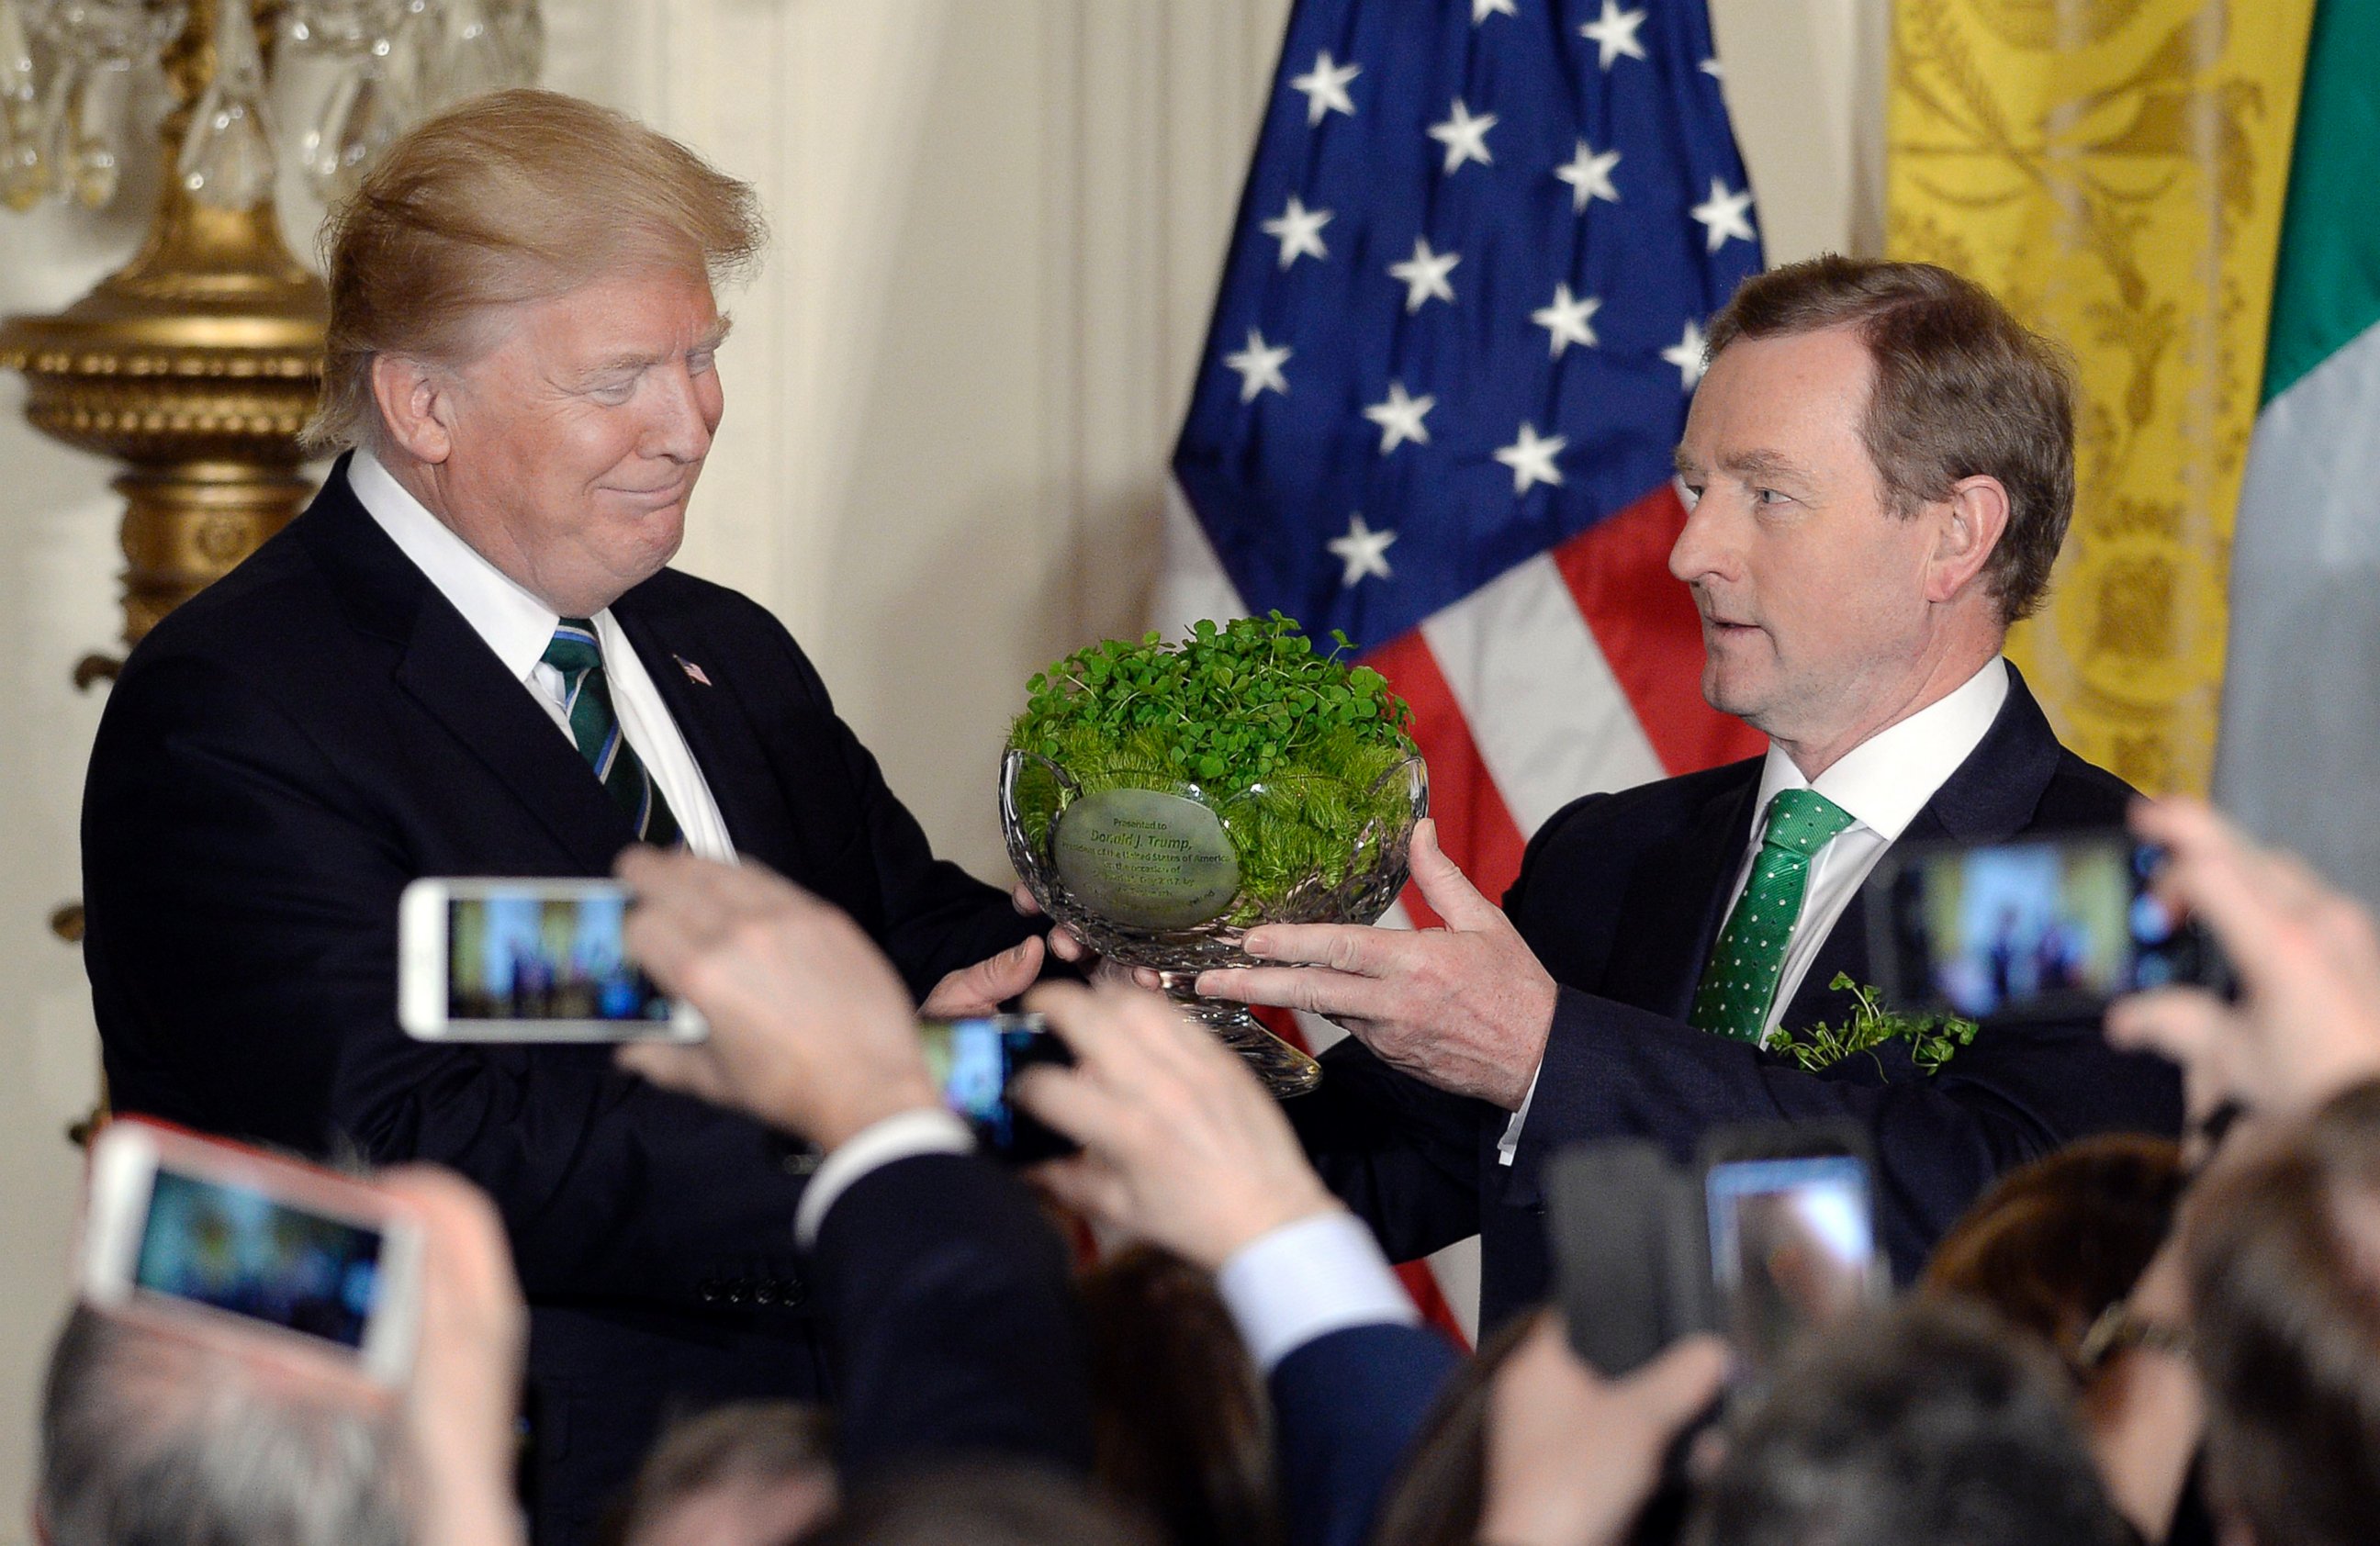 PHOTO: President Donald Trump, accepts a bowl of shamrocks from Enda Kenny, Ireland's prime minister during a reception in the East Room of the White House in Washington, March 16, 2017. 